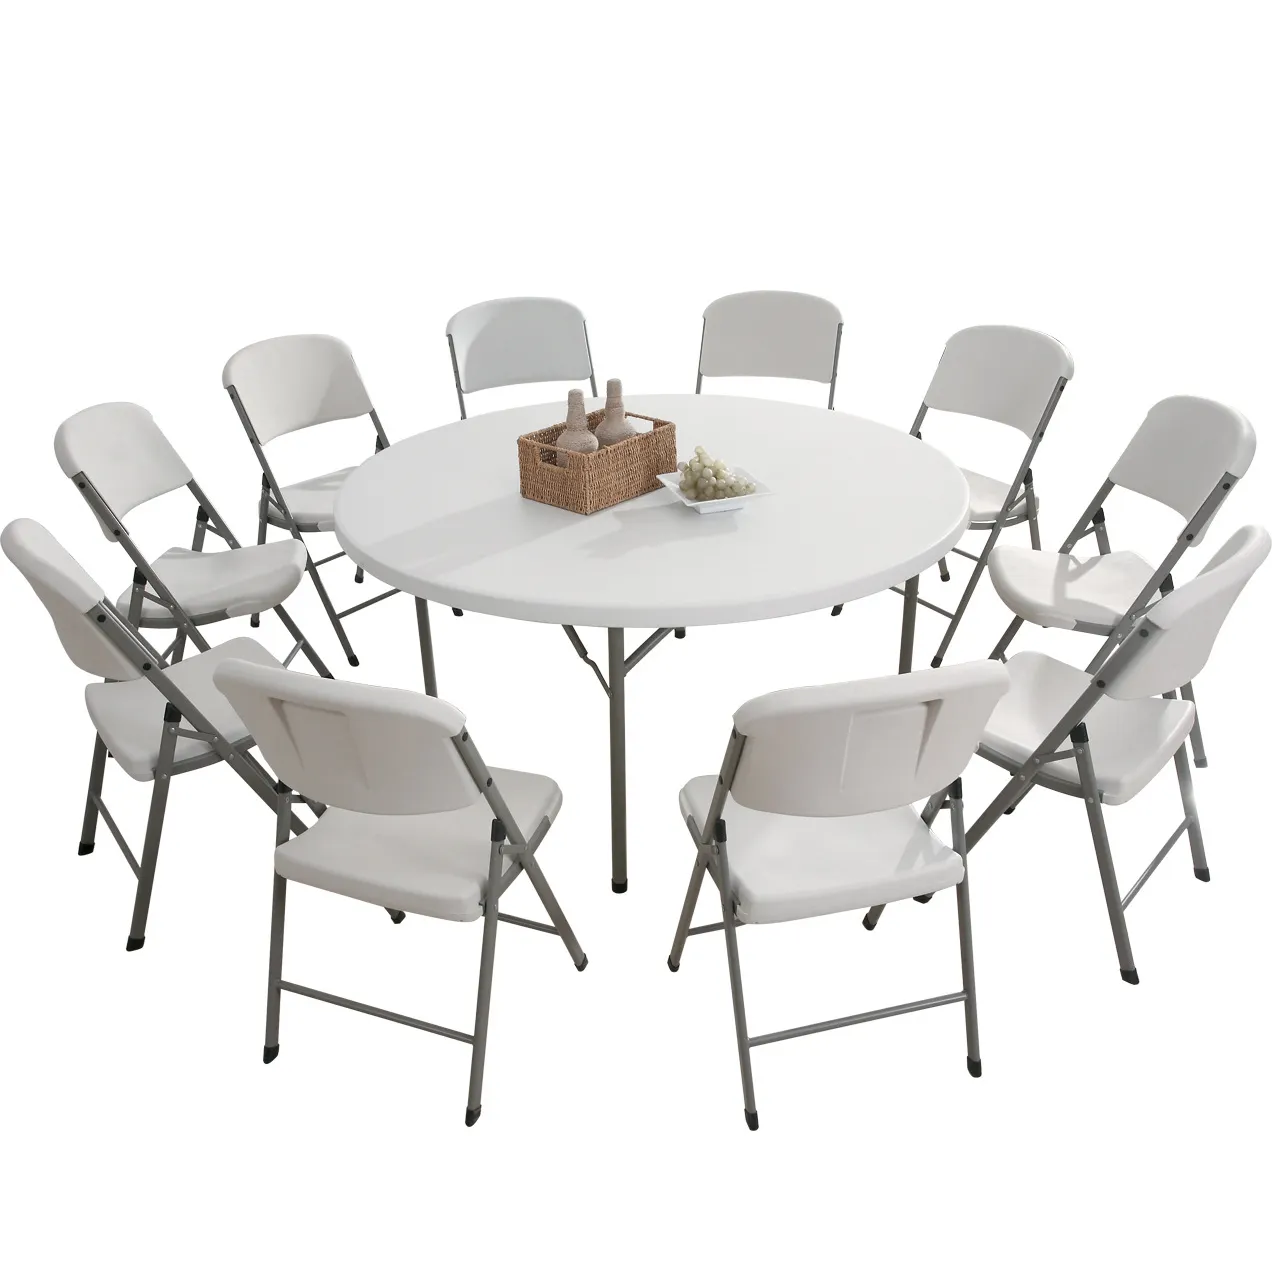 Outdoor Garden Housed Folding Portable Lightweight Plastic 8 Feet Banquet Party Tables And Chairs